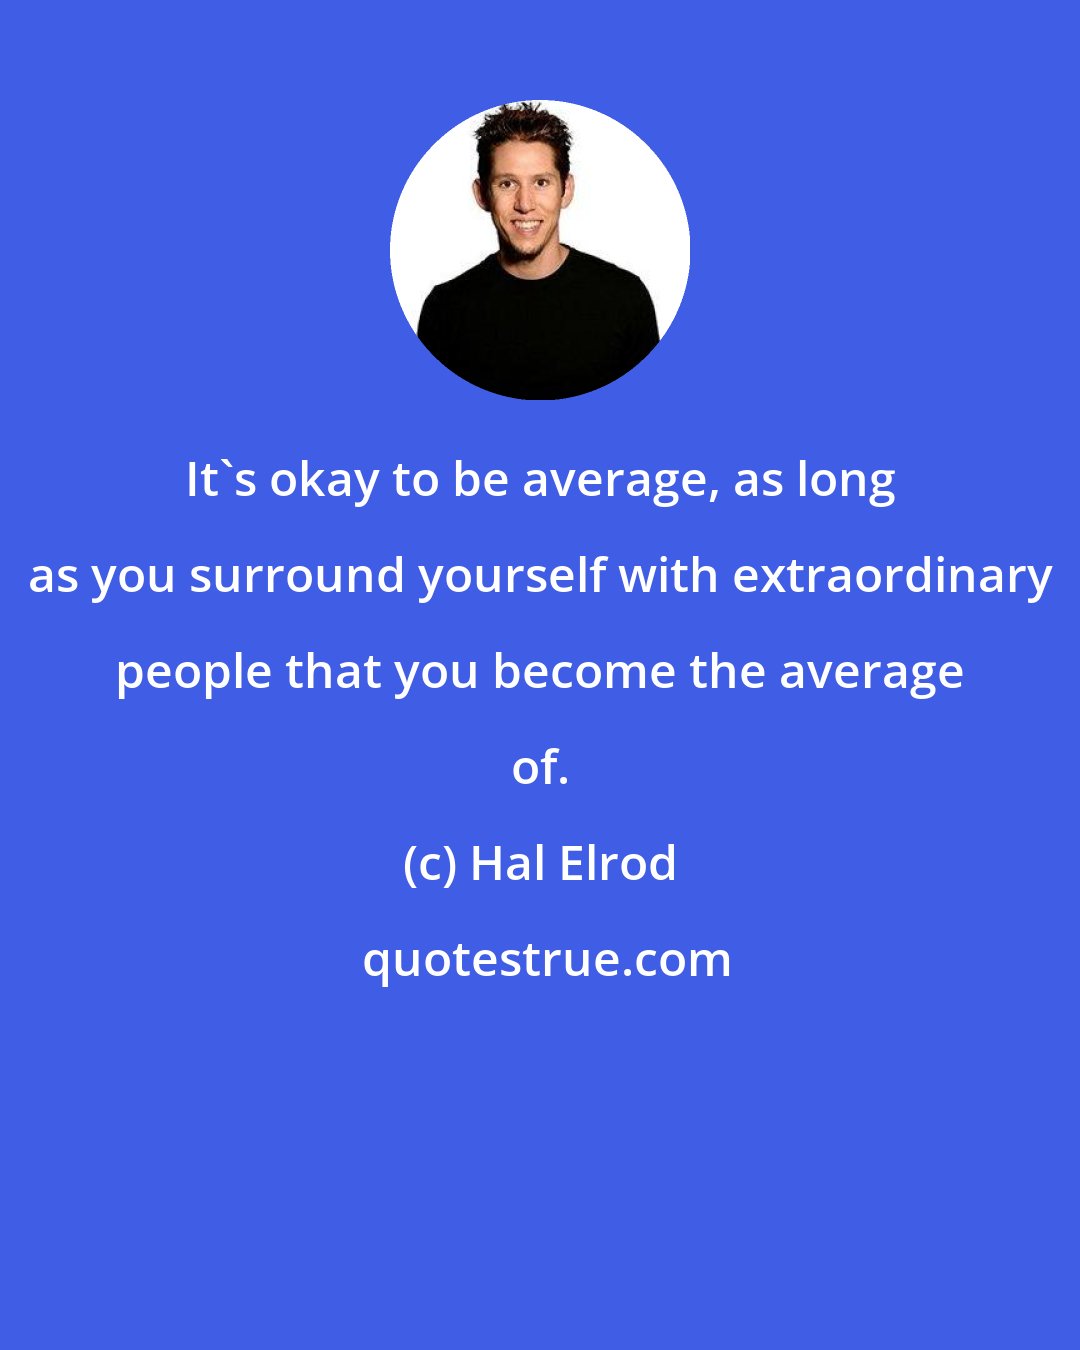 Hal Elrod: It's okay to be average, as long as you surround yourself with extraordinary people that you become the average of.